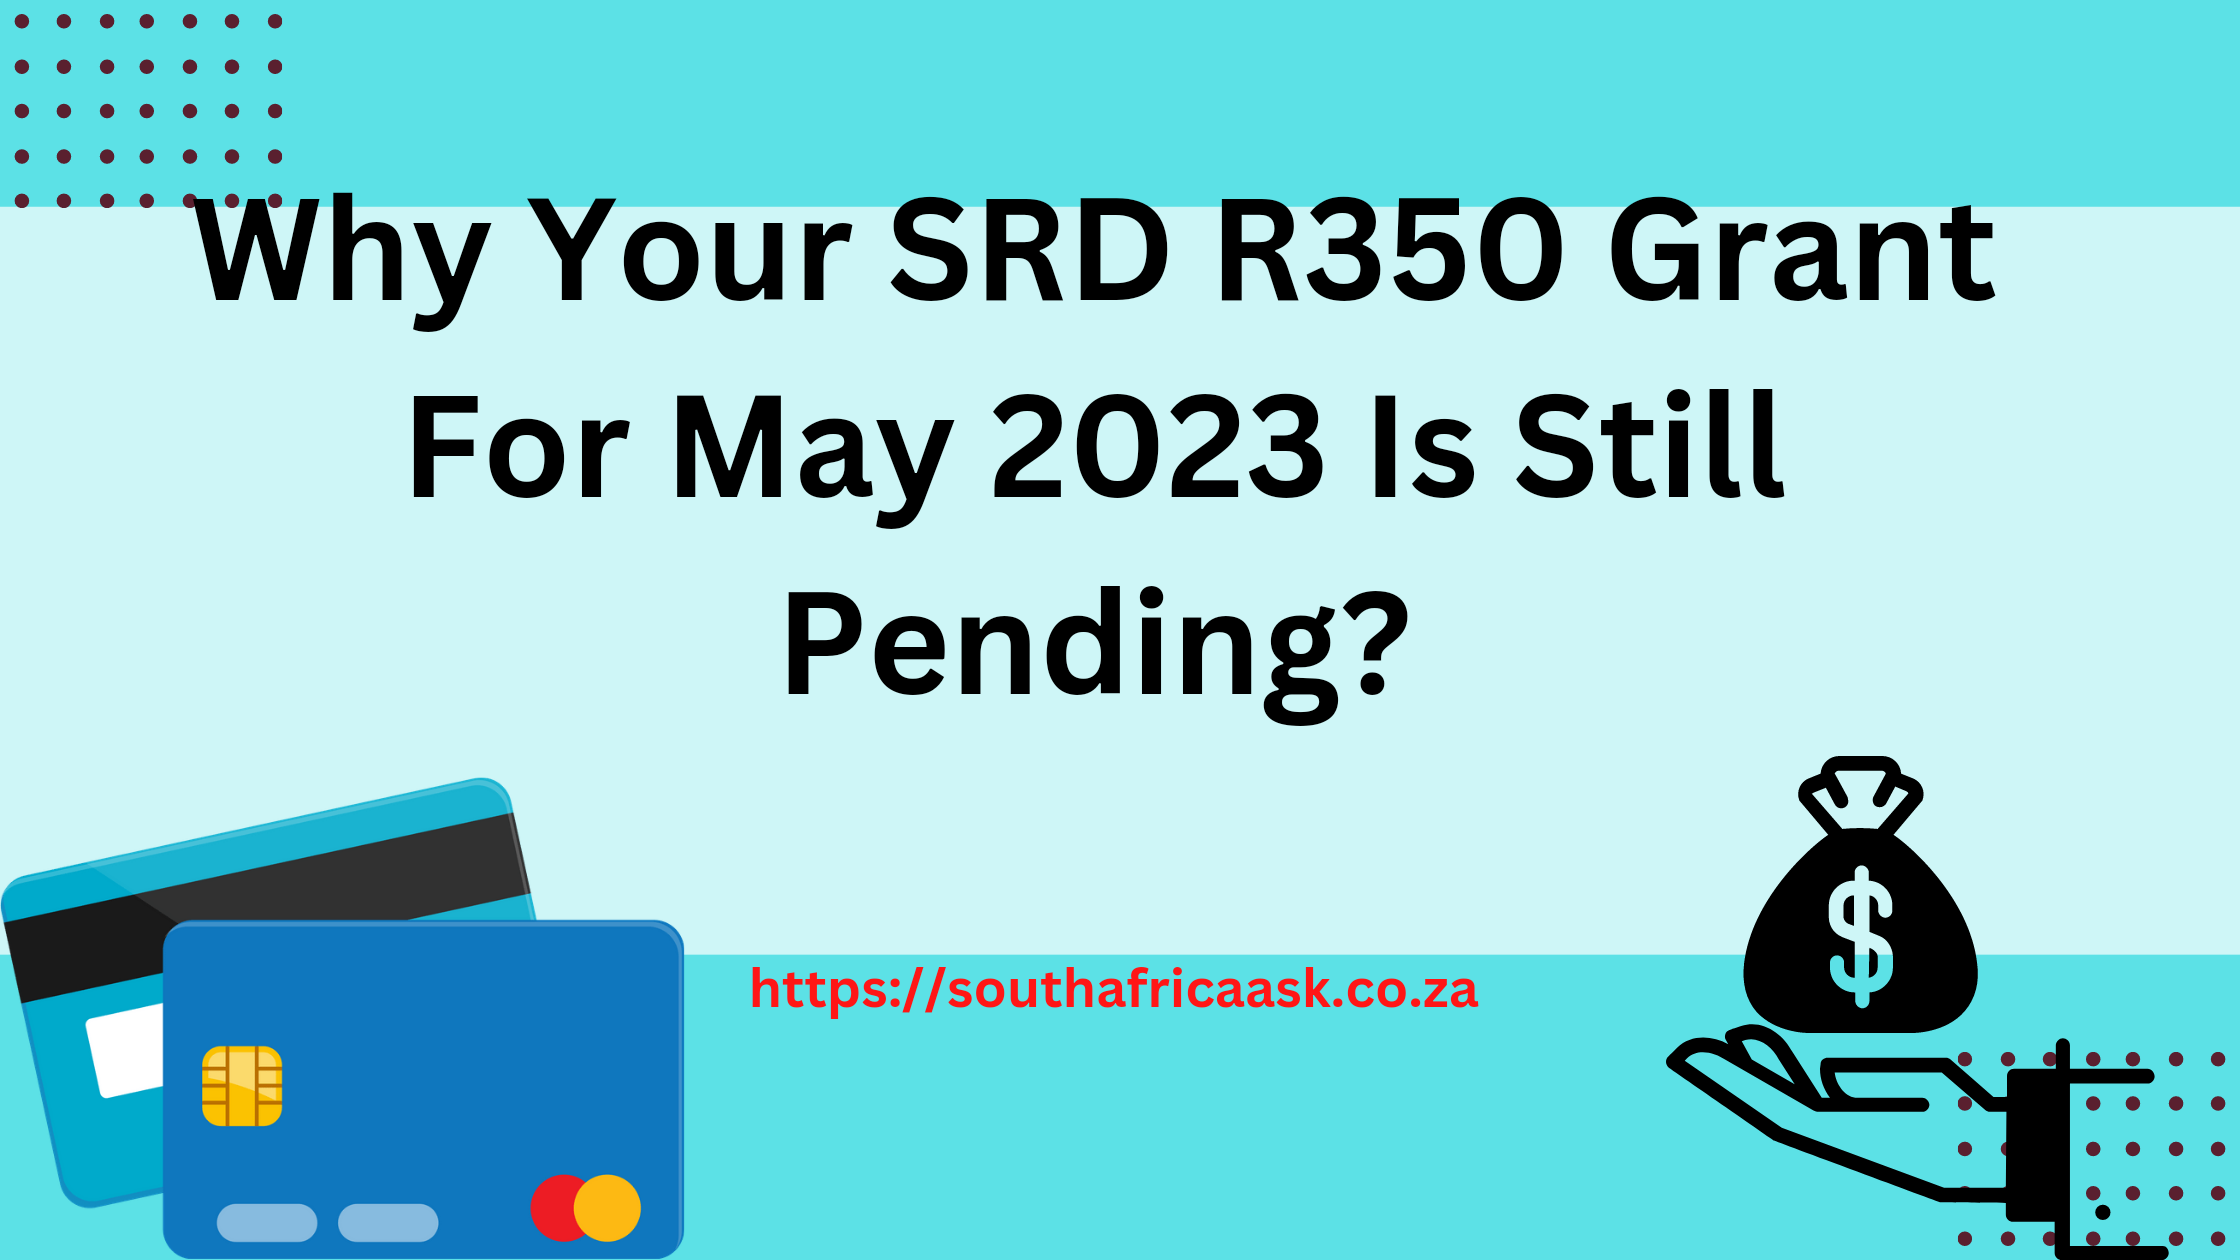 Why Your SRD R350 Grant For May 2023 Is Still Pending?